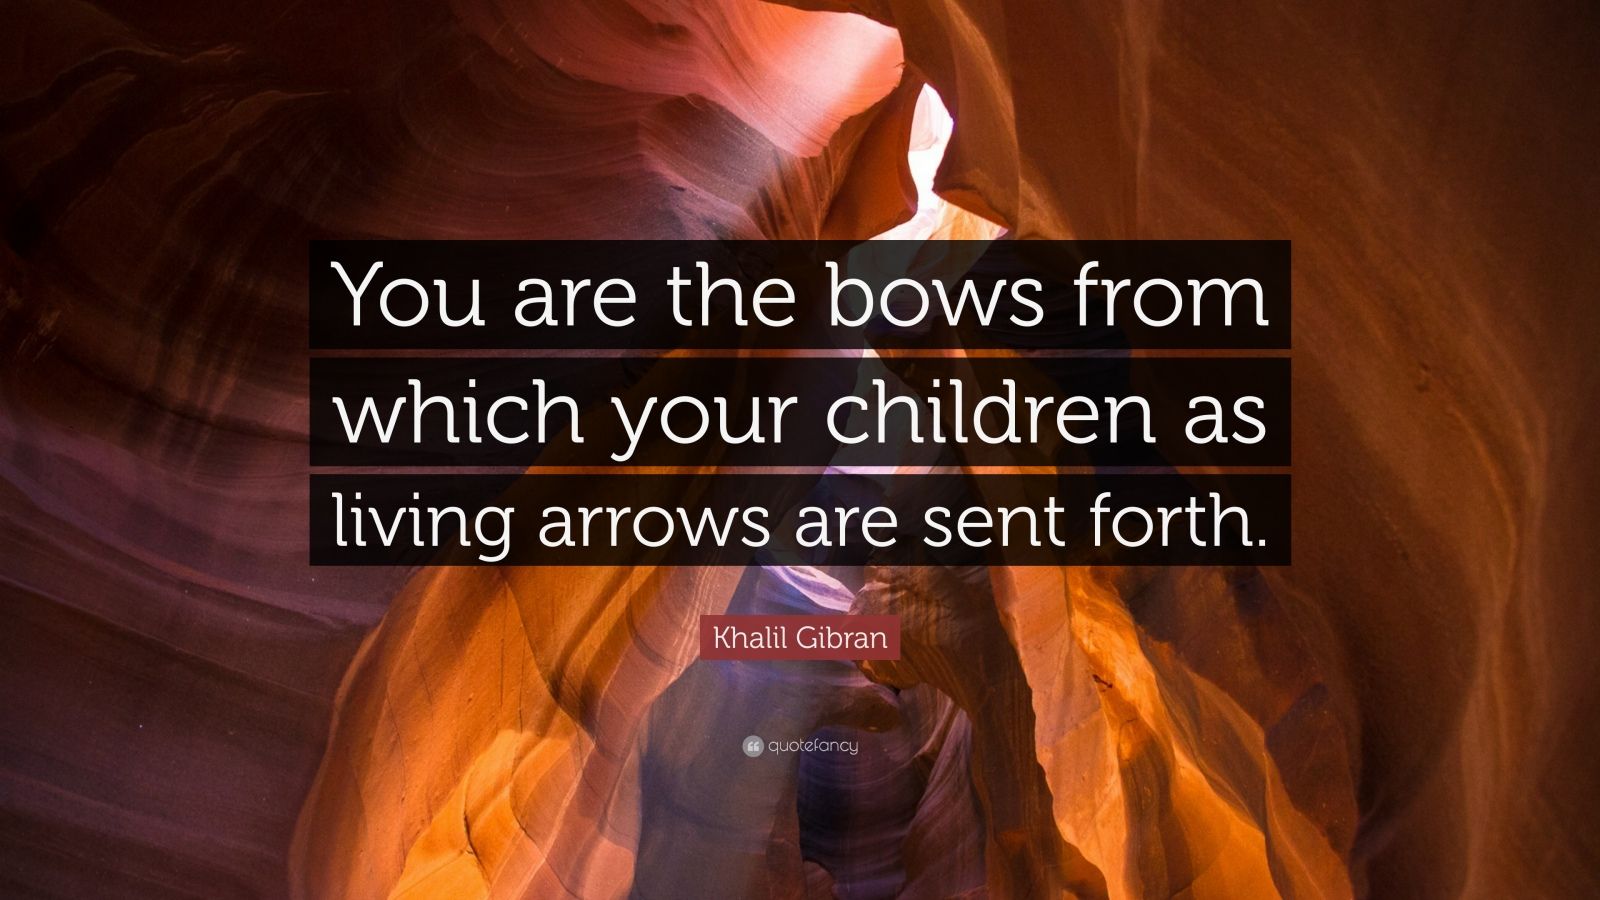 Khalil Gibran Quote You Are The Bows From Which Your Children As Living Arrows Are Sent Forth